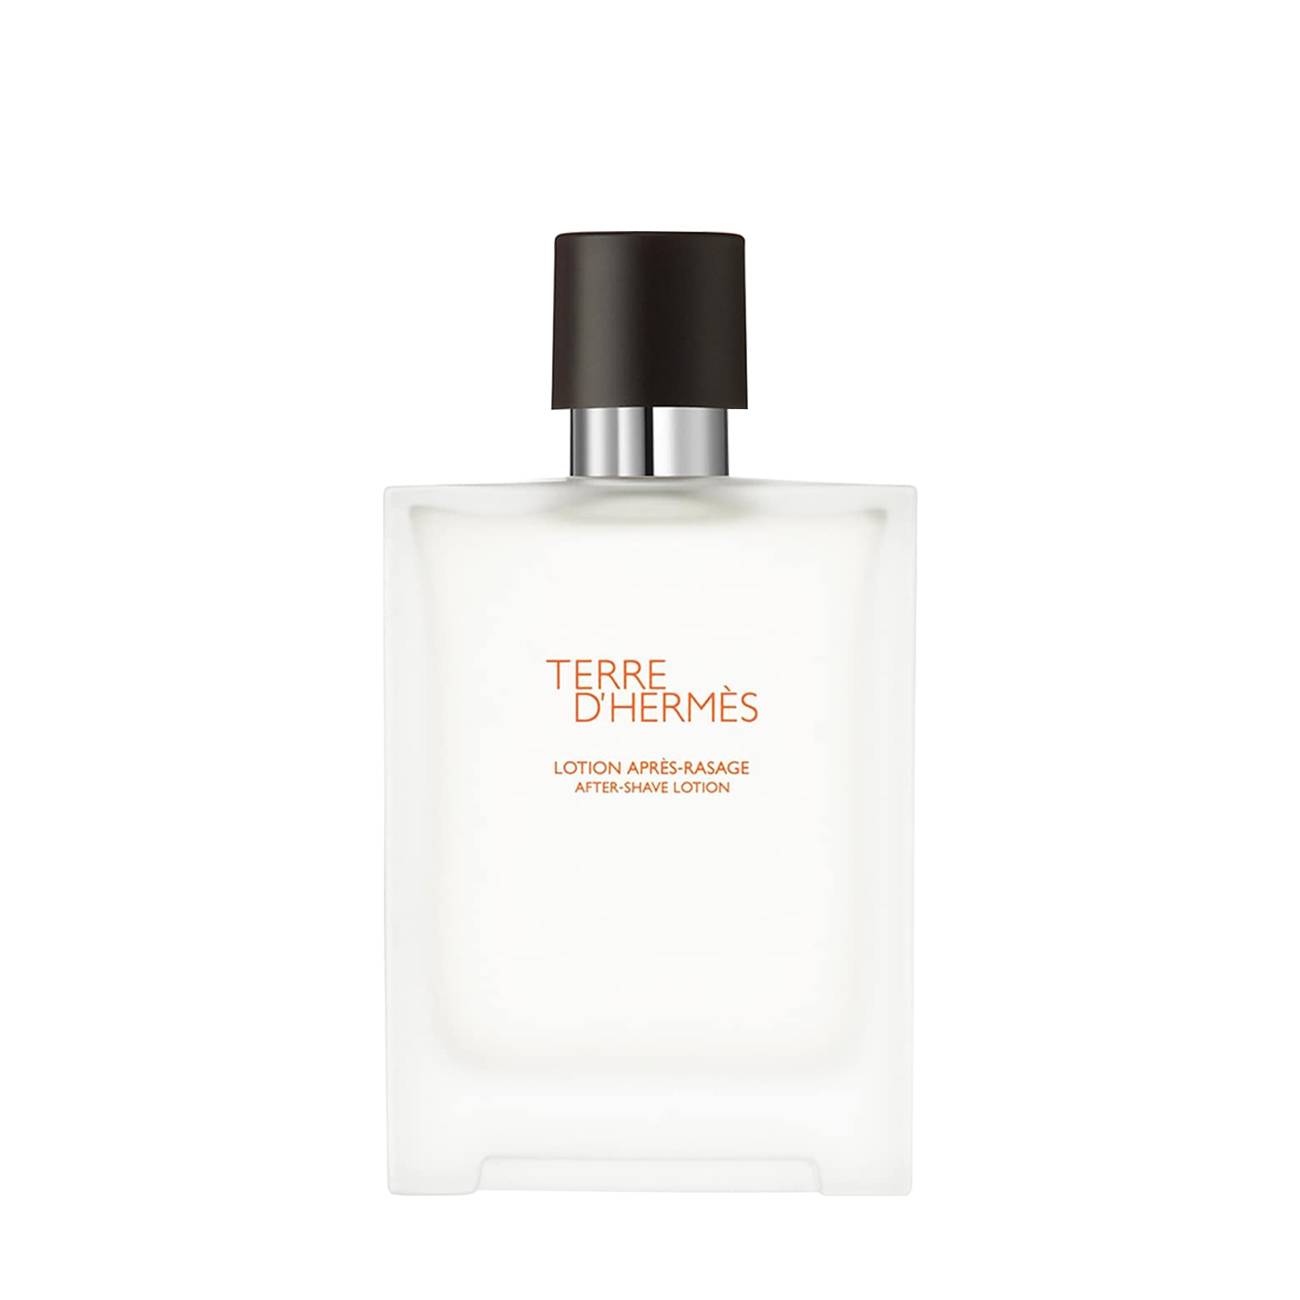 After Shave Lotion 100 ml 100